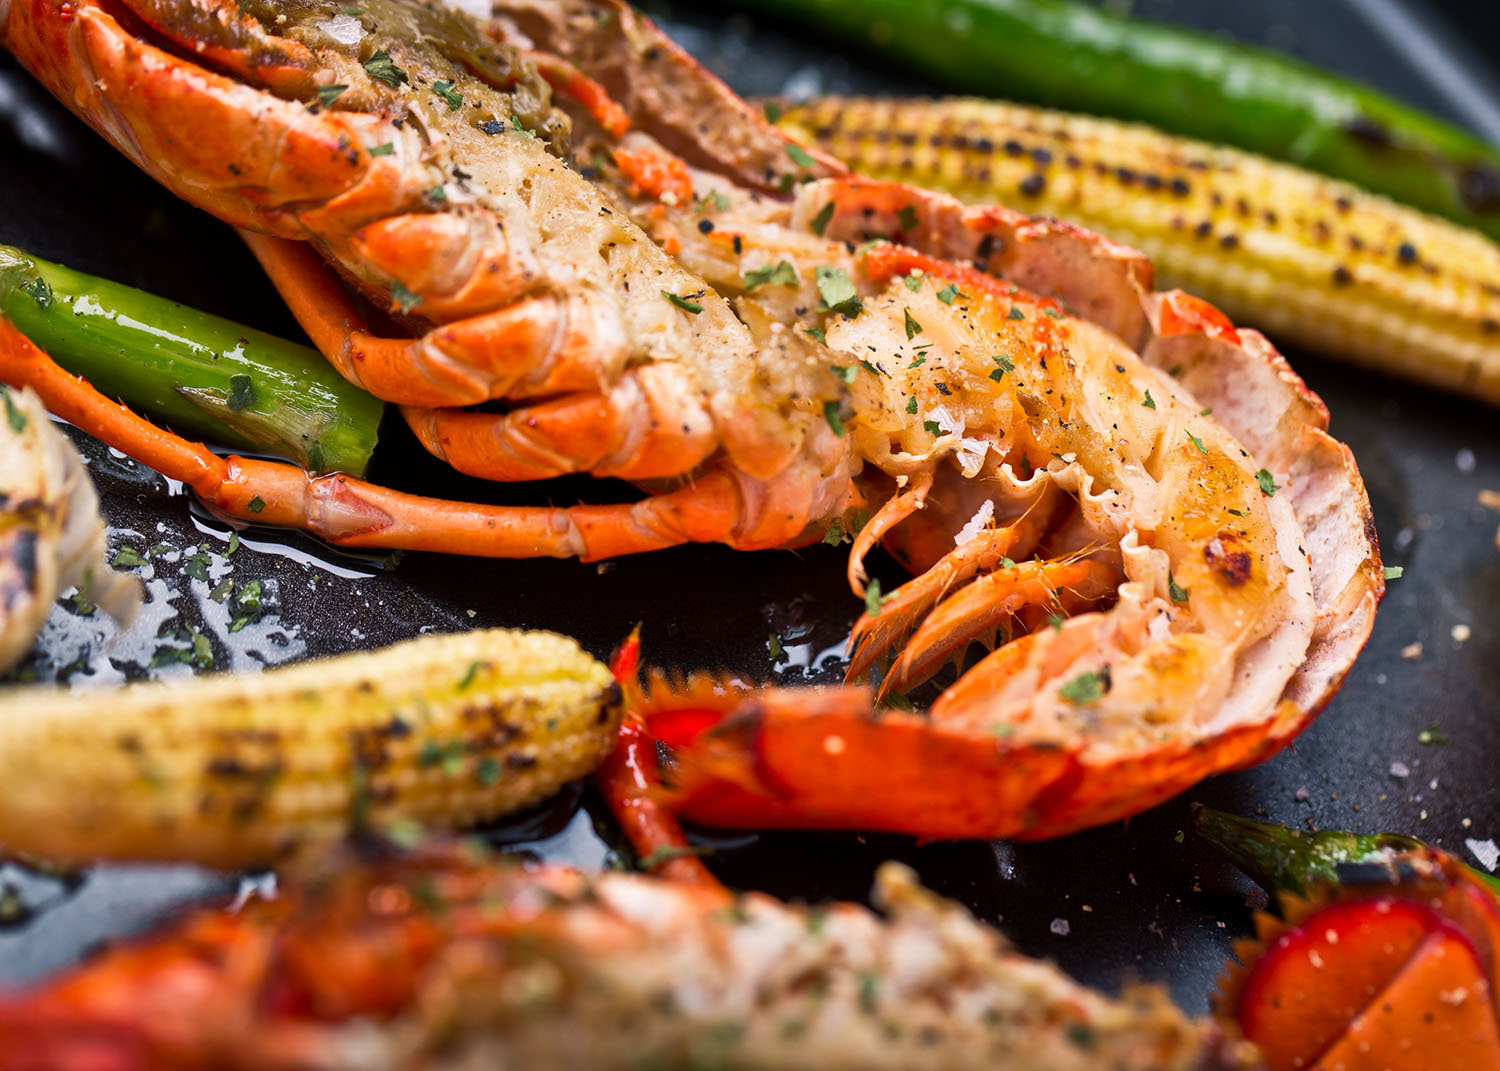 Delicious Fresh Cooked and Grilled Lobster